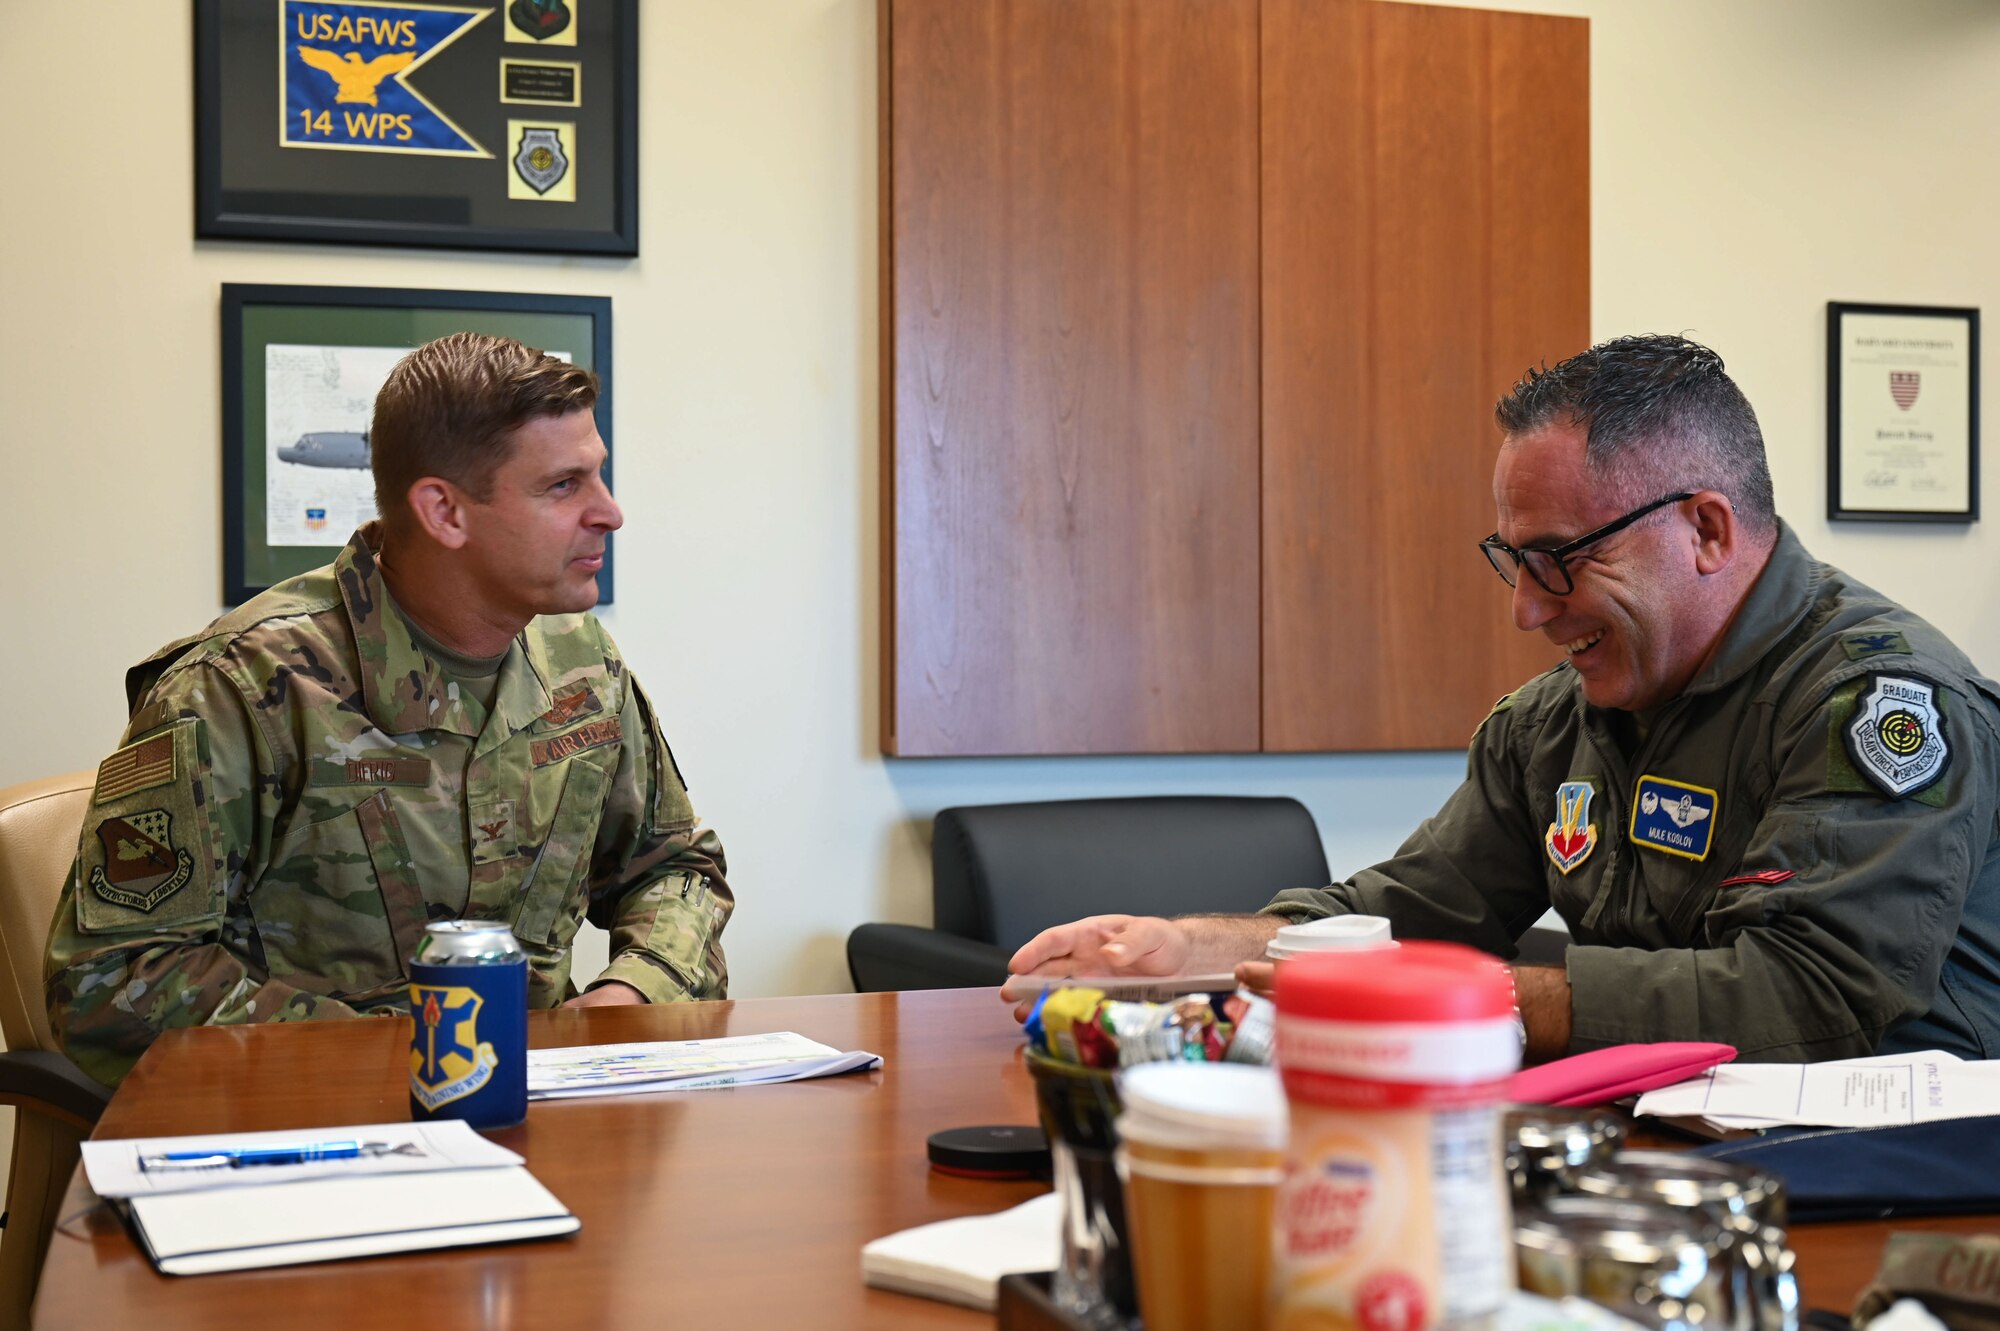 U.S. Air Force Col. Patrick Dierig, 479th Flying Training Group commander, left, talks with U.S. Air Force Col. Josh Koslov, 350th Spectrum Warfare Wing commander, right, about the curriculum of the 479th FTG at Naval Air Station Pensacola, Fla., Aug. 24, 2023. Koslov received a tour of the unit and talked with students, giving career advice and a brief on the 350th SWW. (U.S. Air Force photo by Capt. Benjamin Aronson)